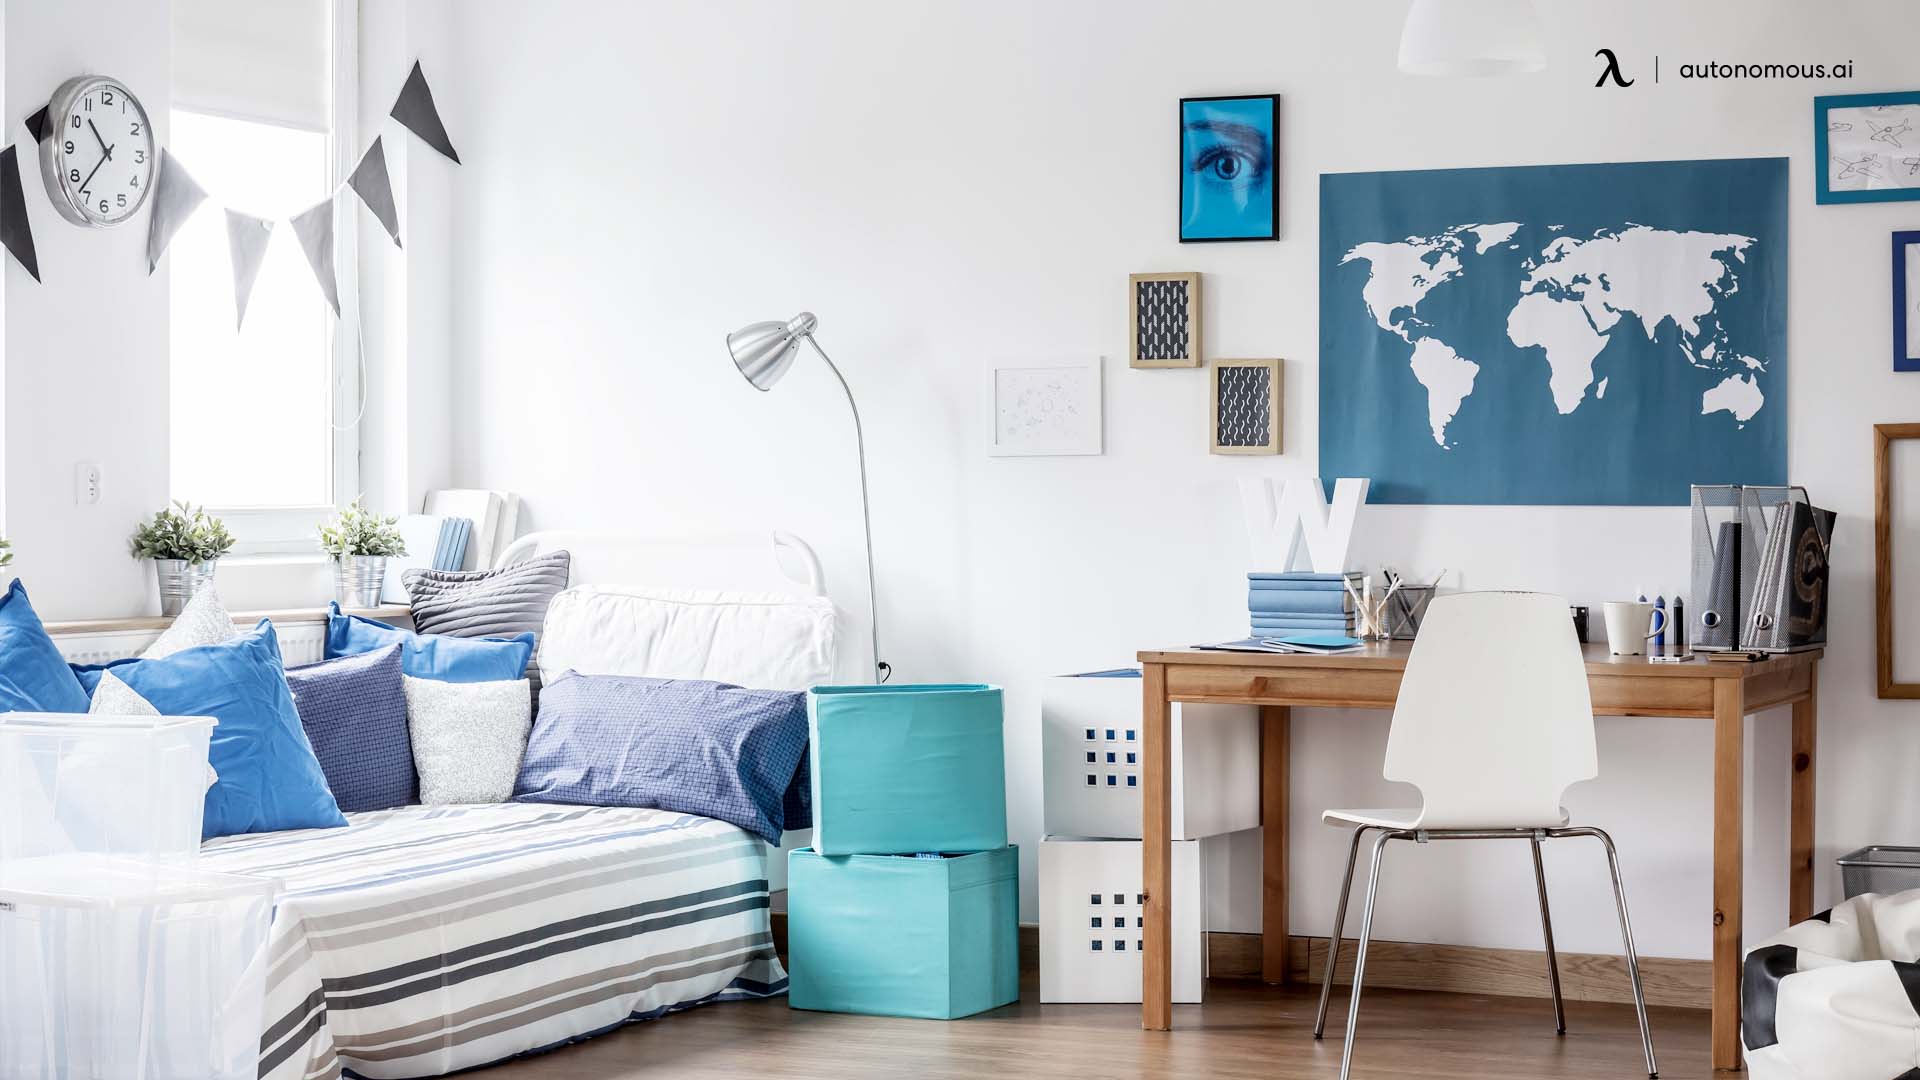 Where To Put A Desk In Bedroom: 7 Options